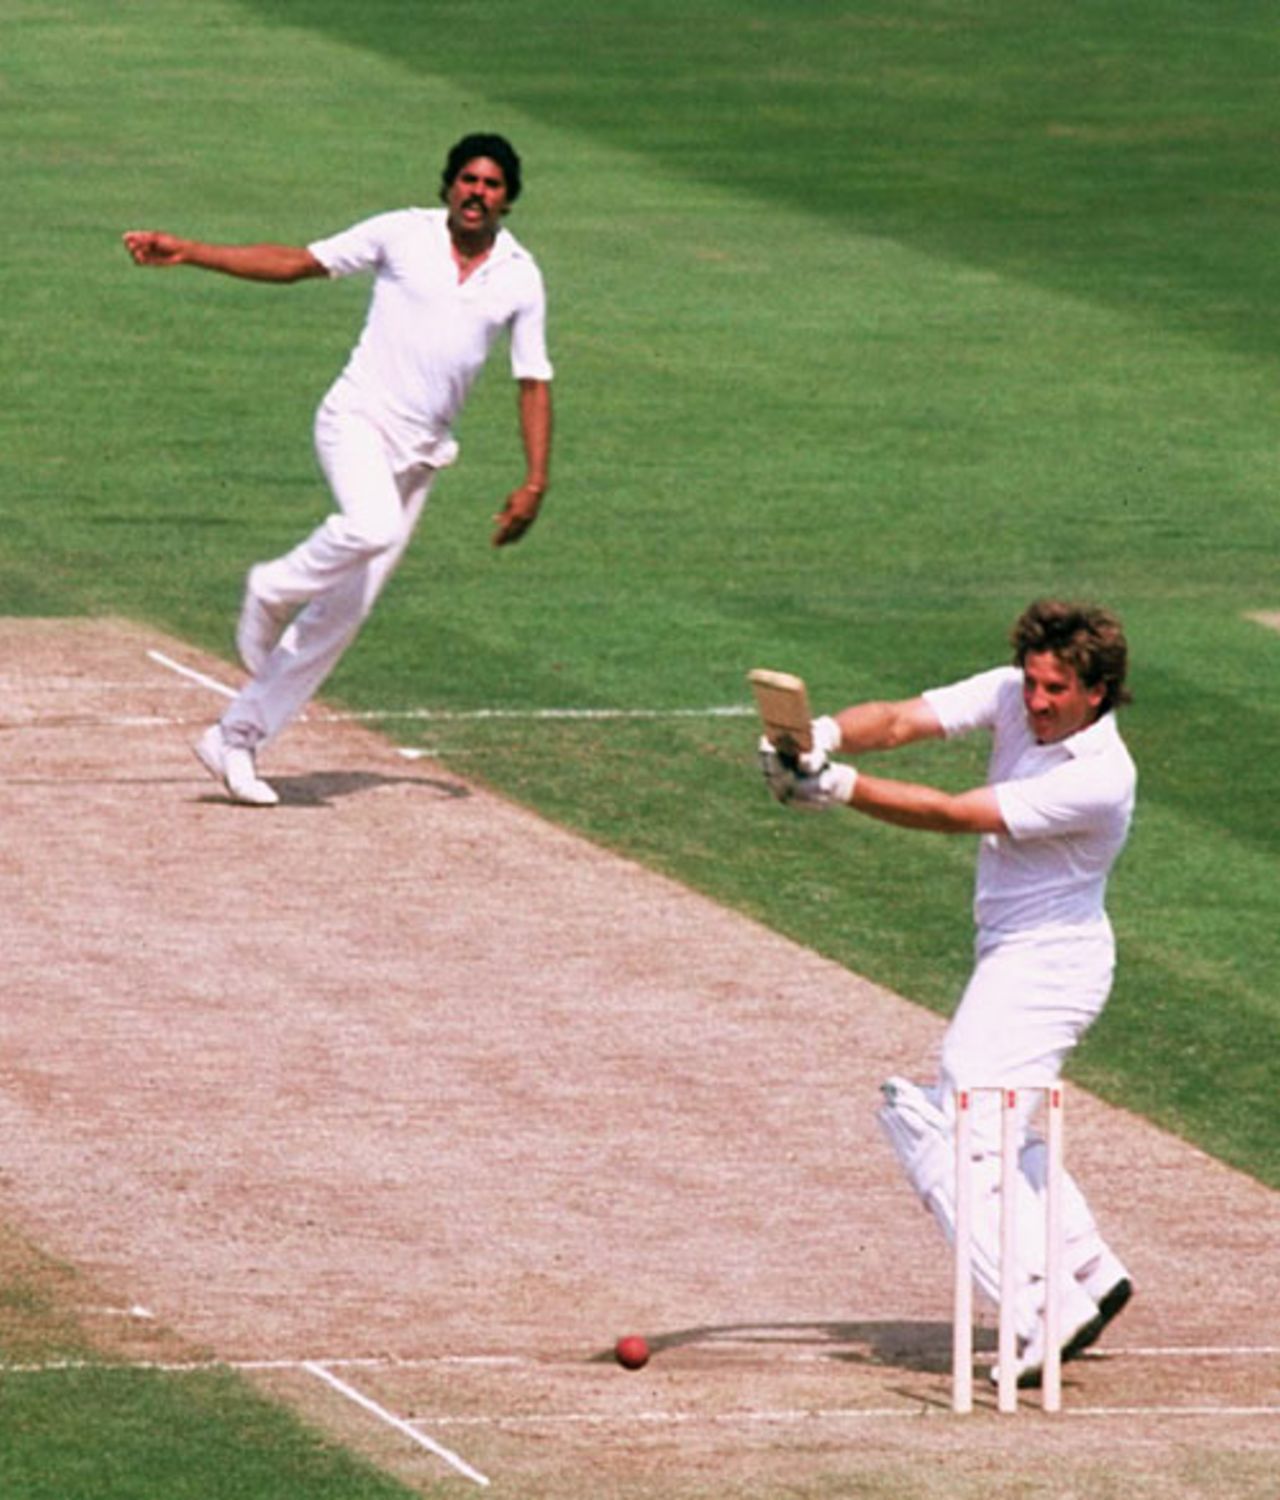 Ian Botham pulls Kapil Dev during his double century in the third Test v India at The Oval, July 9, 1982 